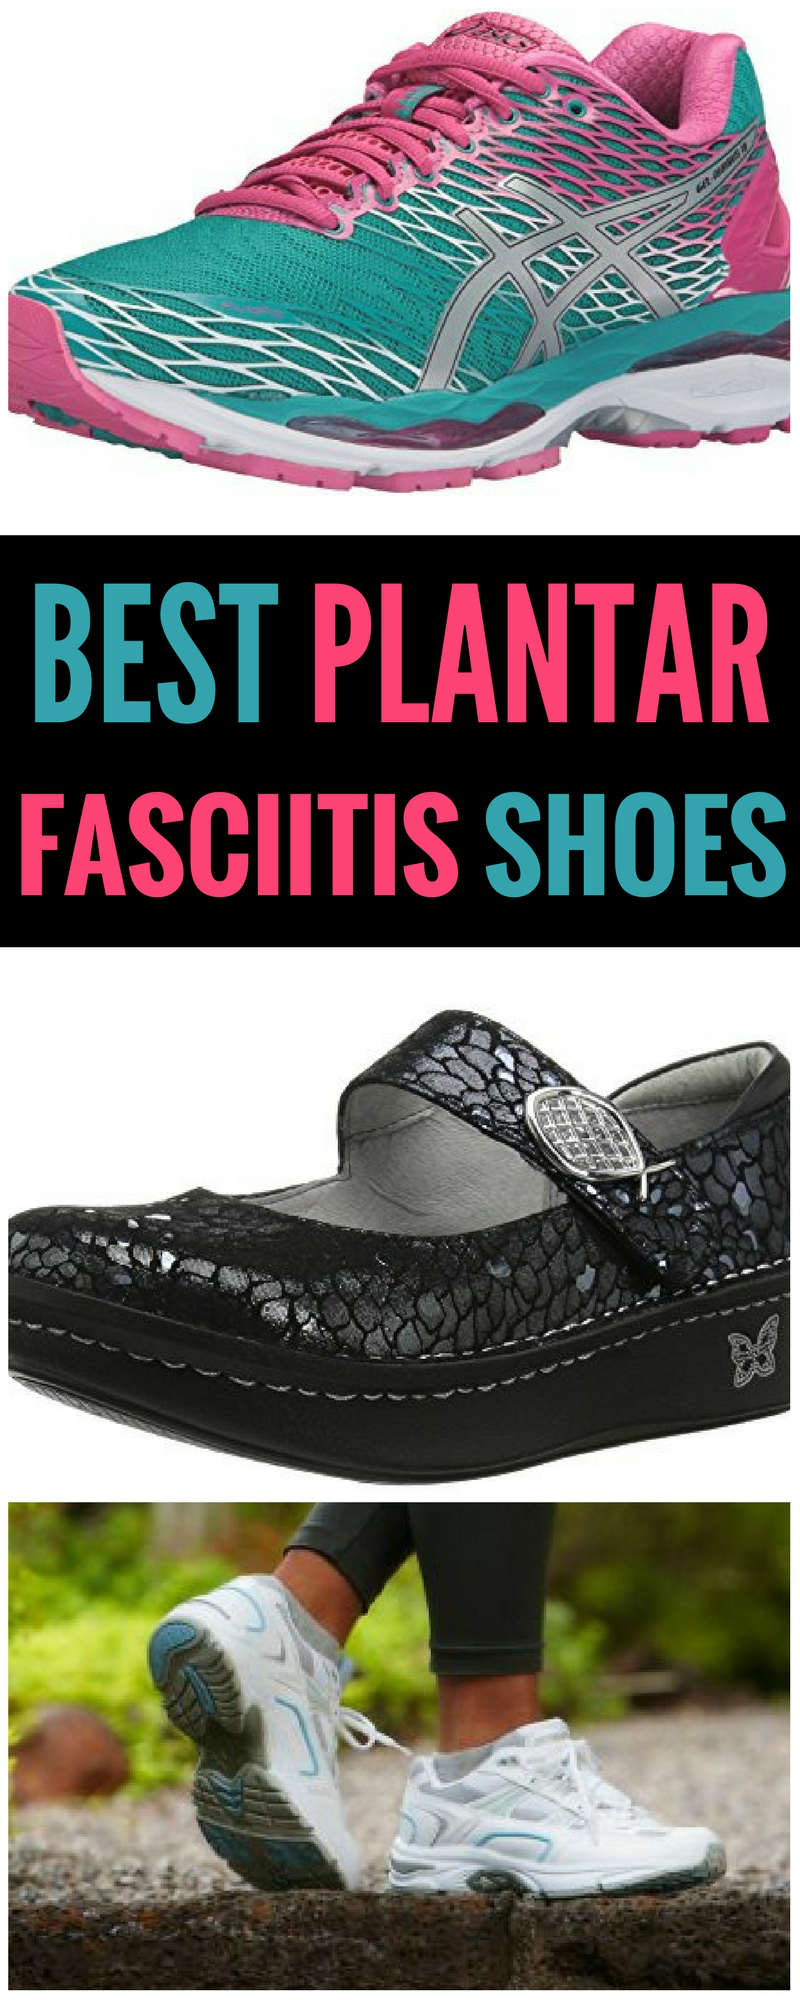 the best chef shoes for flat feet and plantar fasciitis.